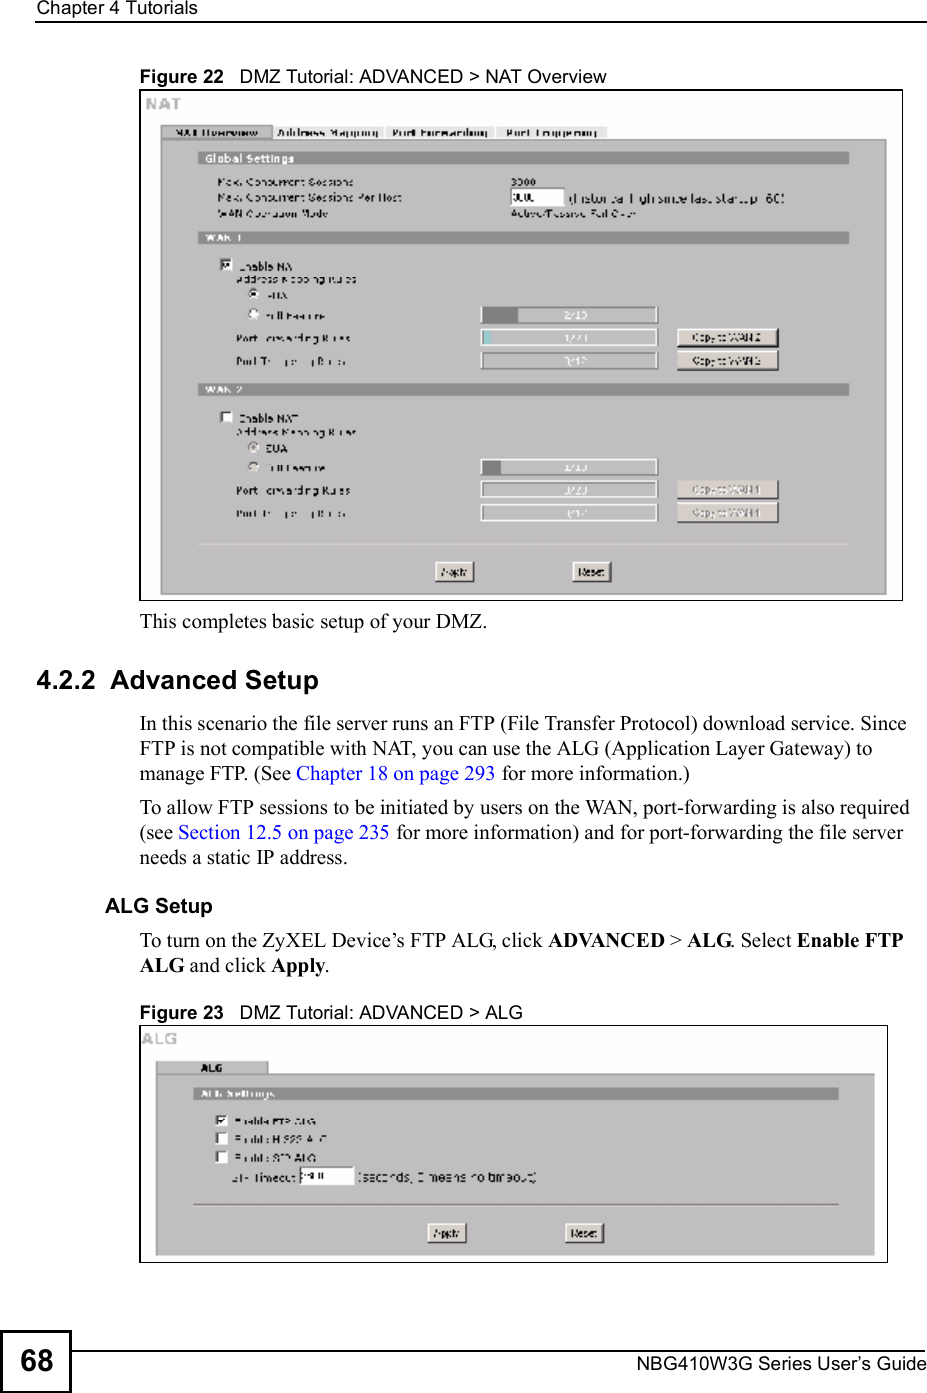 Chapter 4TutorialsNBG410W3G Series User s Guide68Figure 22   DMZ Tutorial: ADVANCED &gt; NAT Overview This completes basic setup of your DMZ.4.2.2  Advanced Setup In this scenario the file server runs an FTP (File Transfer Protocol) download service. Since FTP is not compatible with NAT, you can use the ALG (Application Layer Gateway) to manage FTP. (See Chapter 18 on page 293 for more information.)To allow FTP sessions to be initiated by users on the WAN, port-forwarding is also required (see Section 12.5 on page 235 for more information) and for port-forwarding the file server needs a static IP address.ALG SetupTo turn on the ZyXEL Device!s FTP ALG, click ADVANCED &gt; ALG. Select Enable FTP ALG and click Apply.Figure 23   DMZ Tutorial: ADVANCED &gt; ALG